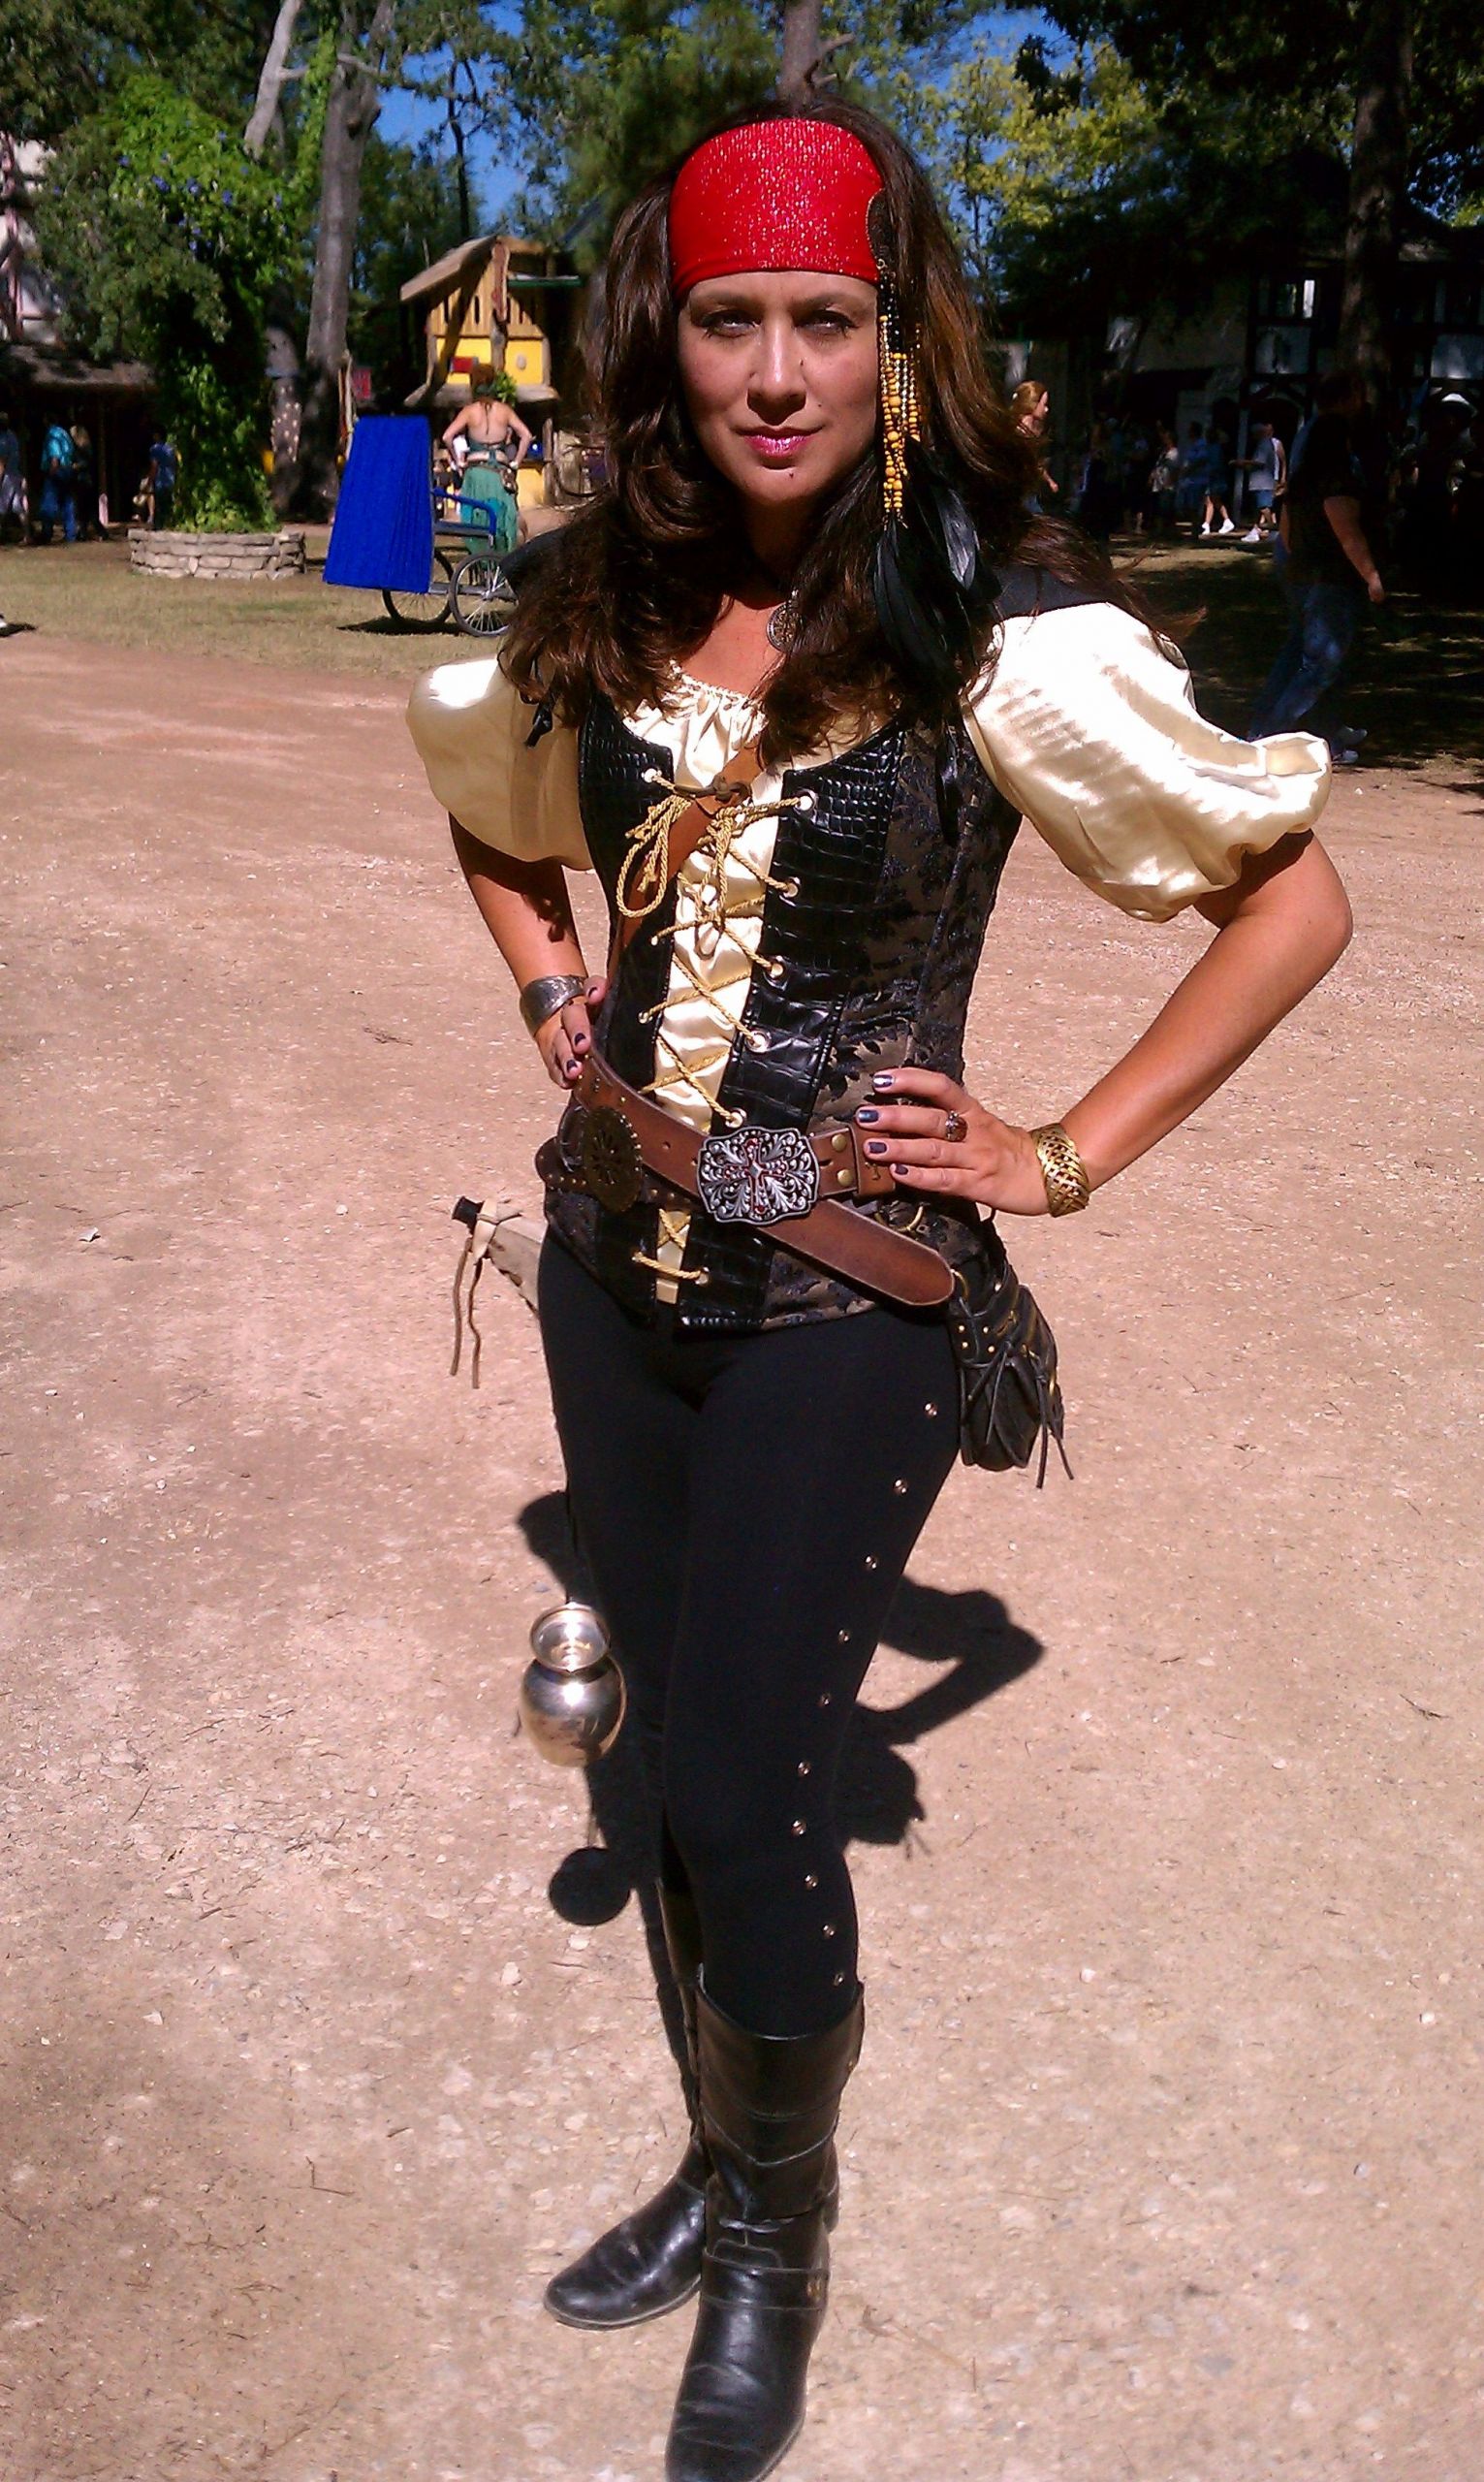 DIY Pirate Costume Women
 My pirate costume with leggings & a short sleeved chemise